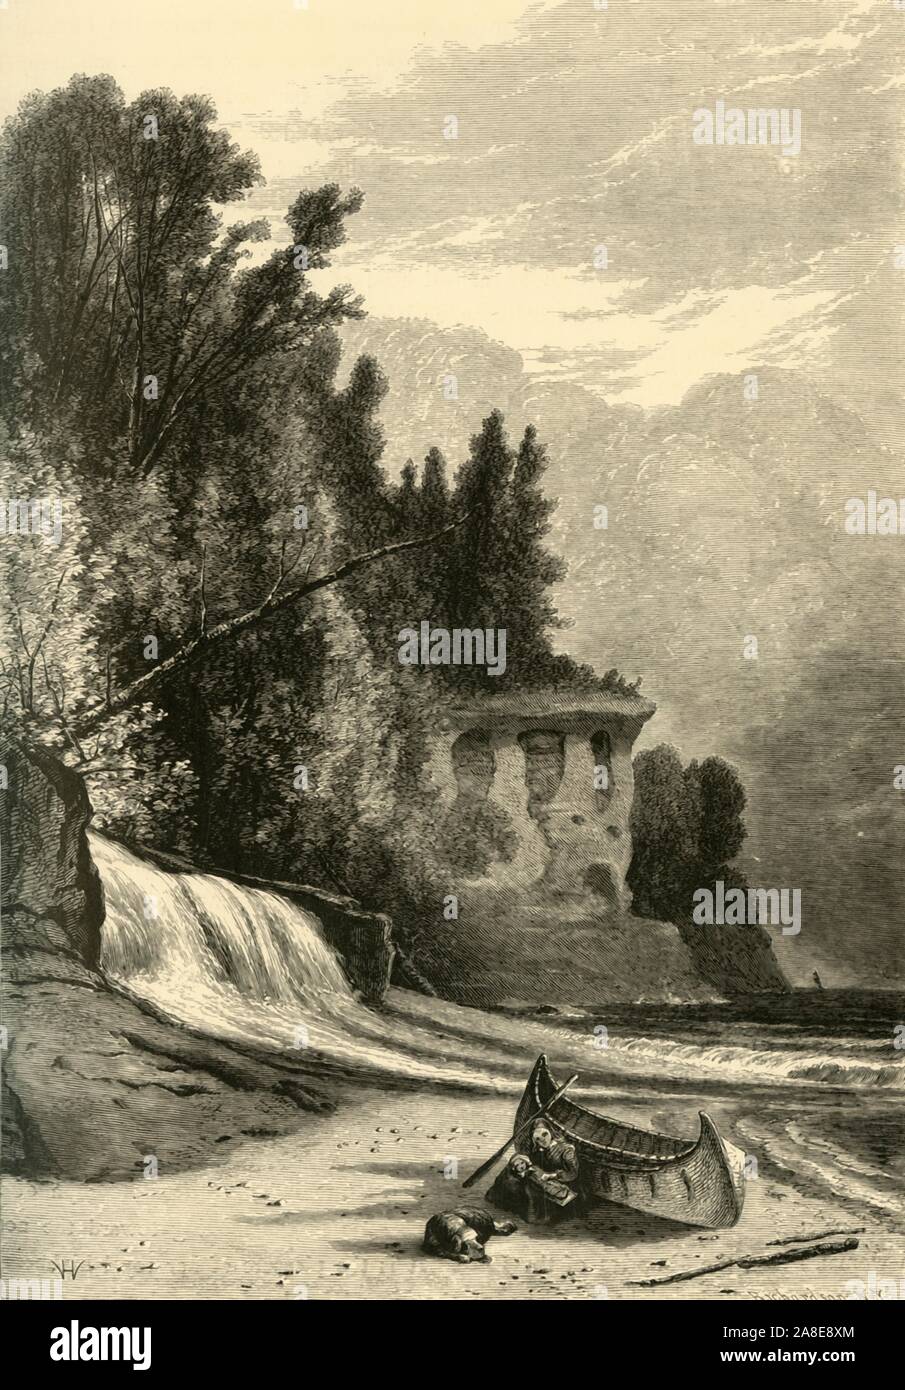 'Chapel Beach', 1872. Waterfall and Chapel Rock (known as La Chapelle by early European explorers), Lake Superior, Michigan, USA. 'This rock-chapel is forty feet above the lake...a temple, with an arched roof of sandstone, resting partly on the cliff behind, and partly on massive columns, as perfect as the columned ruins of Egypt...the continuous wash of the water in and out through holes in the sides is like the low, opening swell of an organ voluntary...A manitou dwelt in this chapel...On the chapel-beach the Indians performed their rites to appease him'. From &quot;Picturesque America; or, Stock Photo